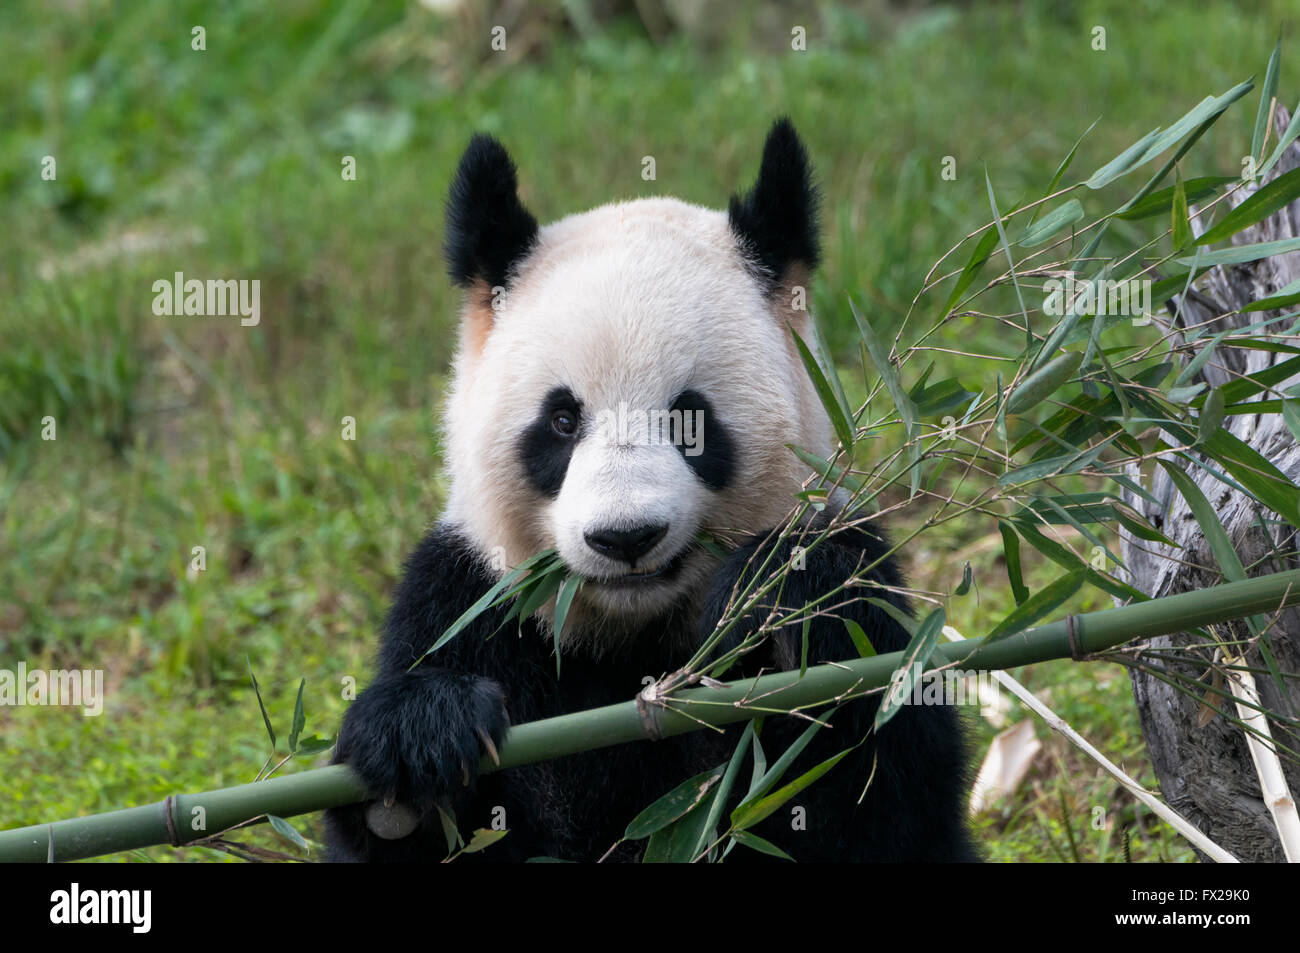 Adult Giant Panda (Ailuropoda melanoleuca), China Conservation and Research Centre for the Giant Pandas, Chengdu, Sichuan, China Stock Photo